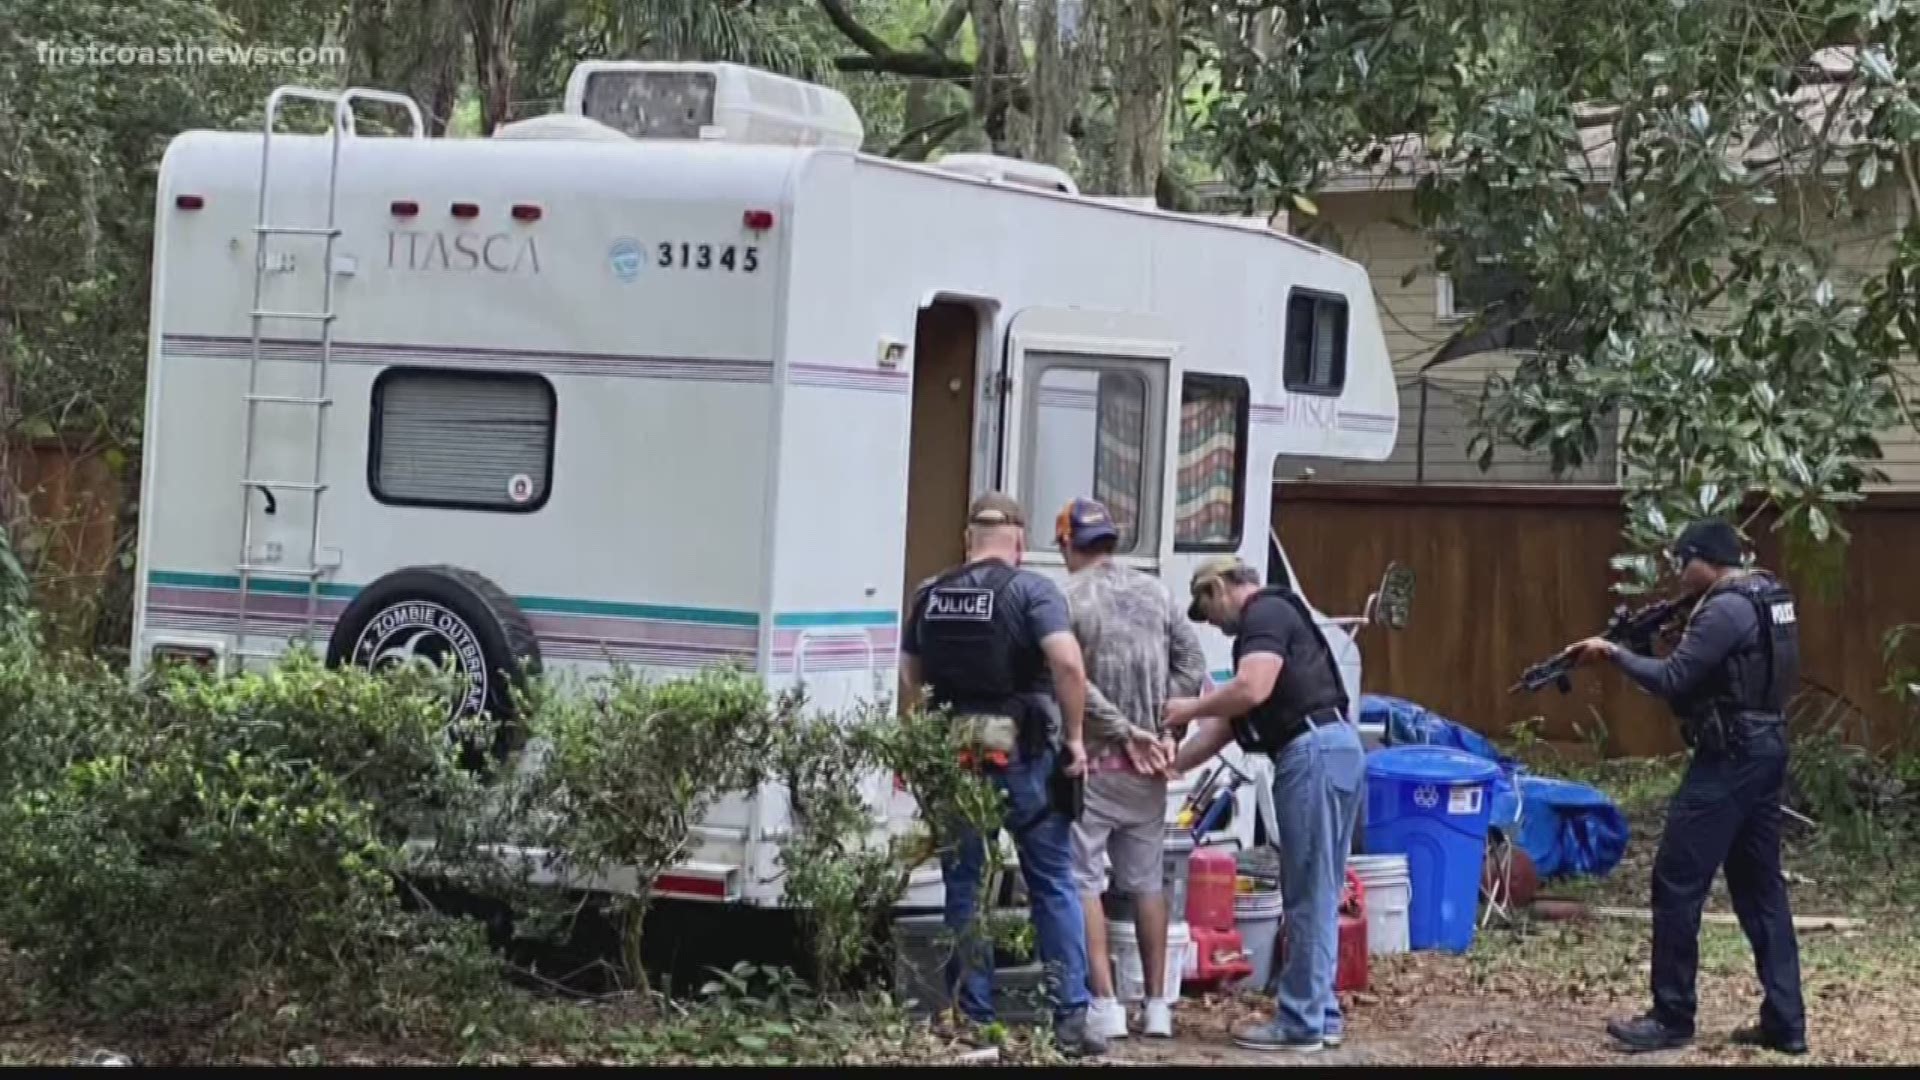 Earlier this week, First Coast News told you about a Jacksonville Beach man who pled for help after his trailer that held his painting equipment was stolen.